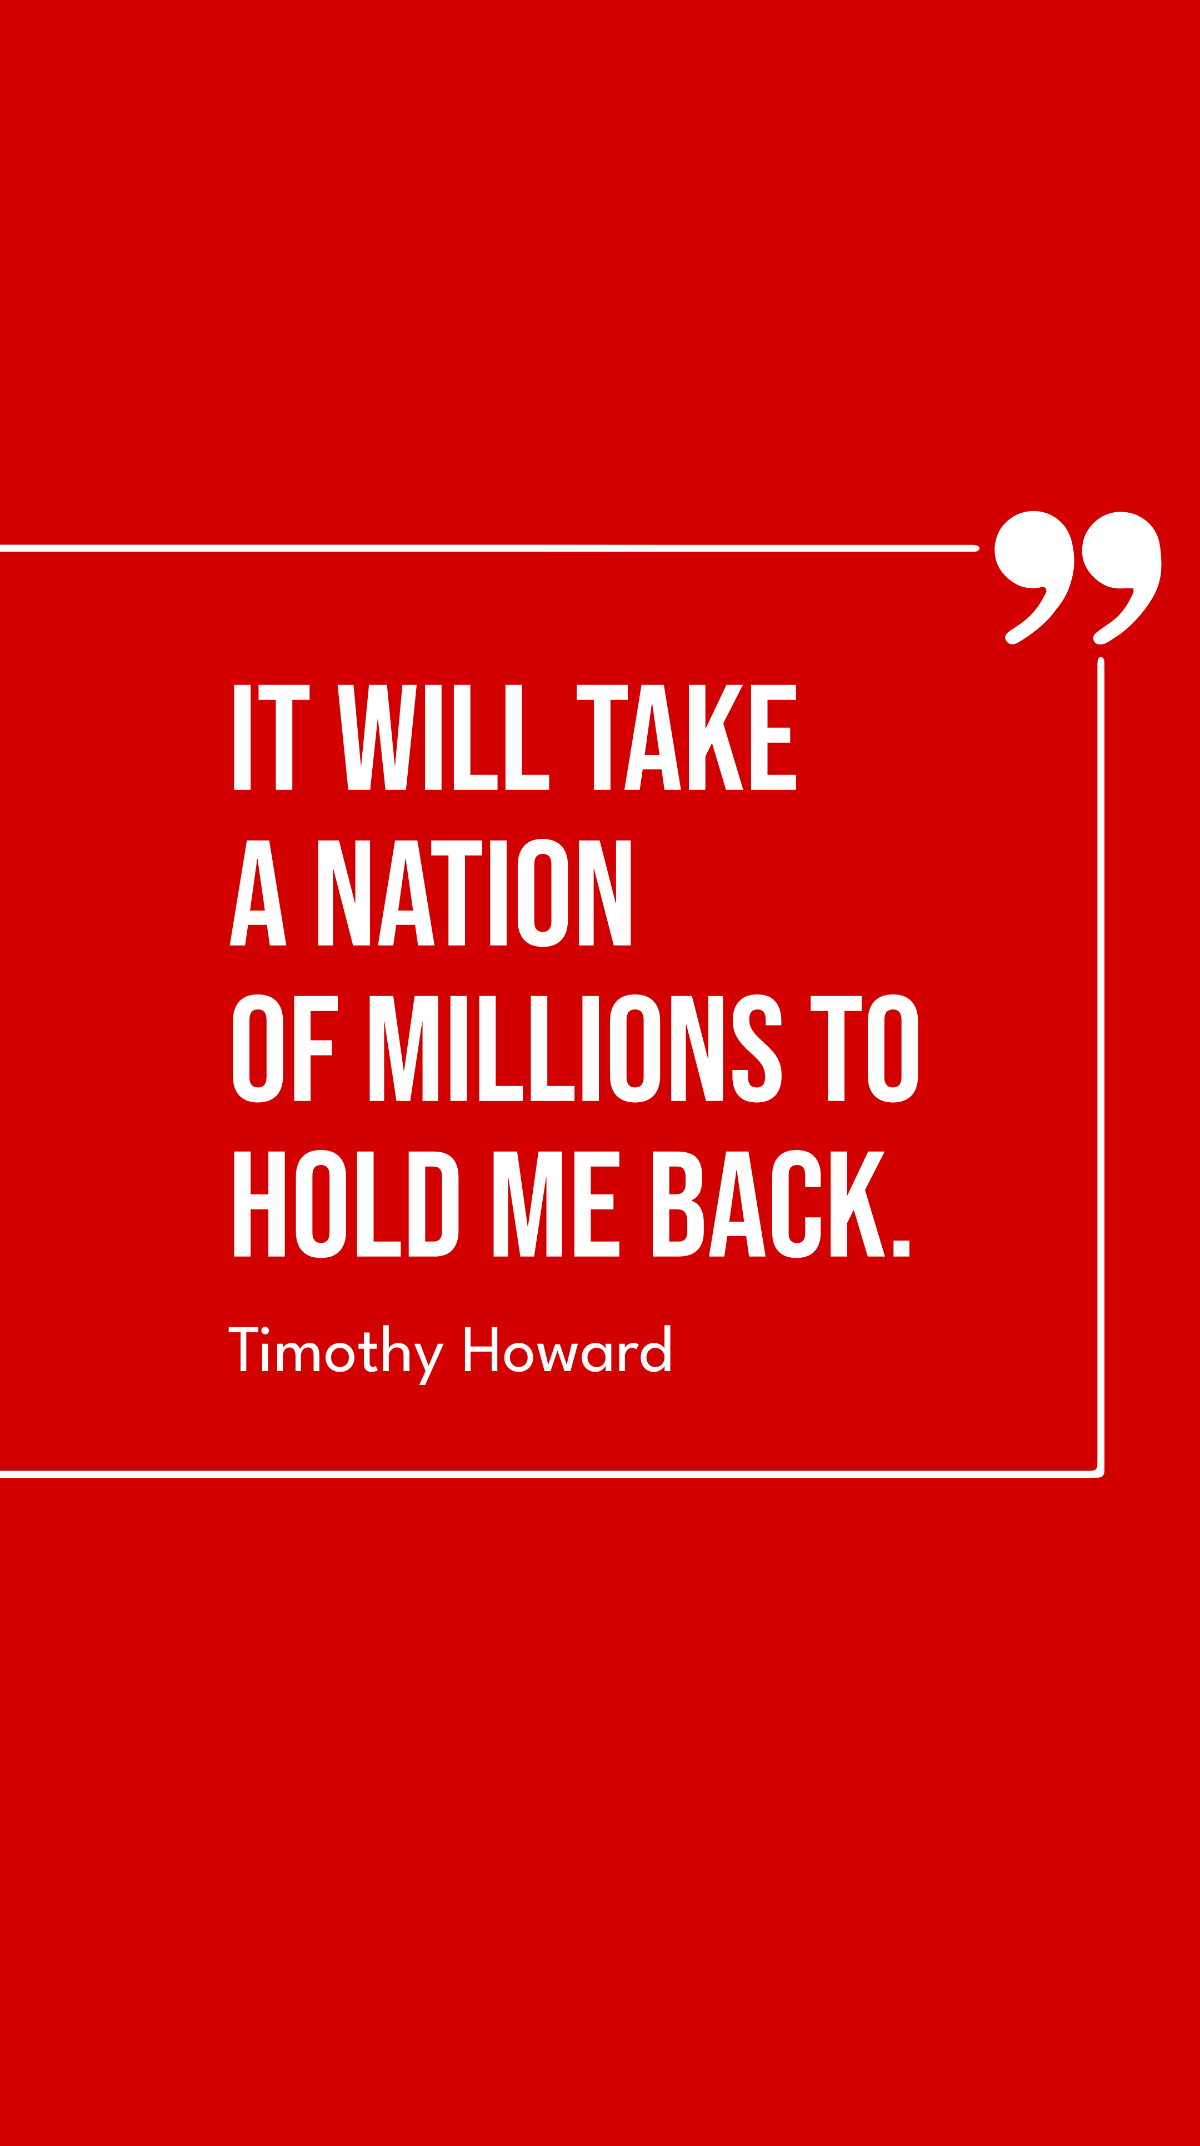 Free Timothy Howard - It will take a nation of millions to hold me back. Template